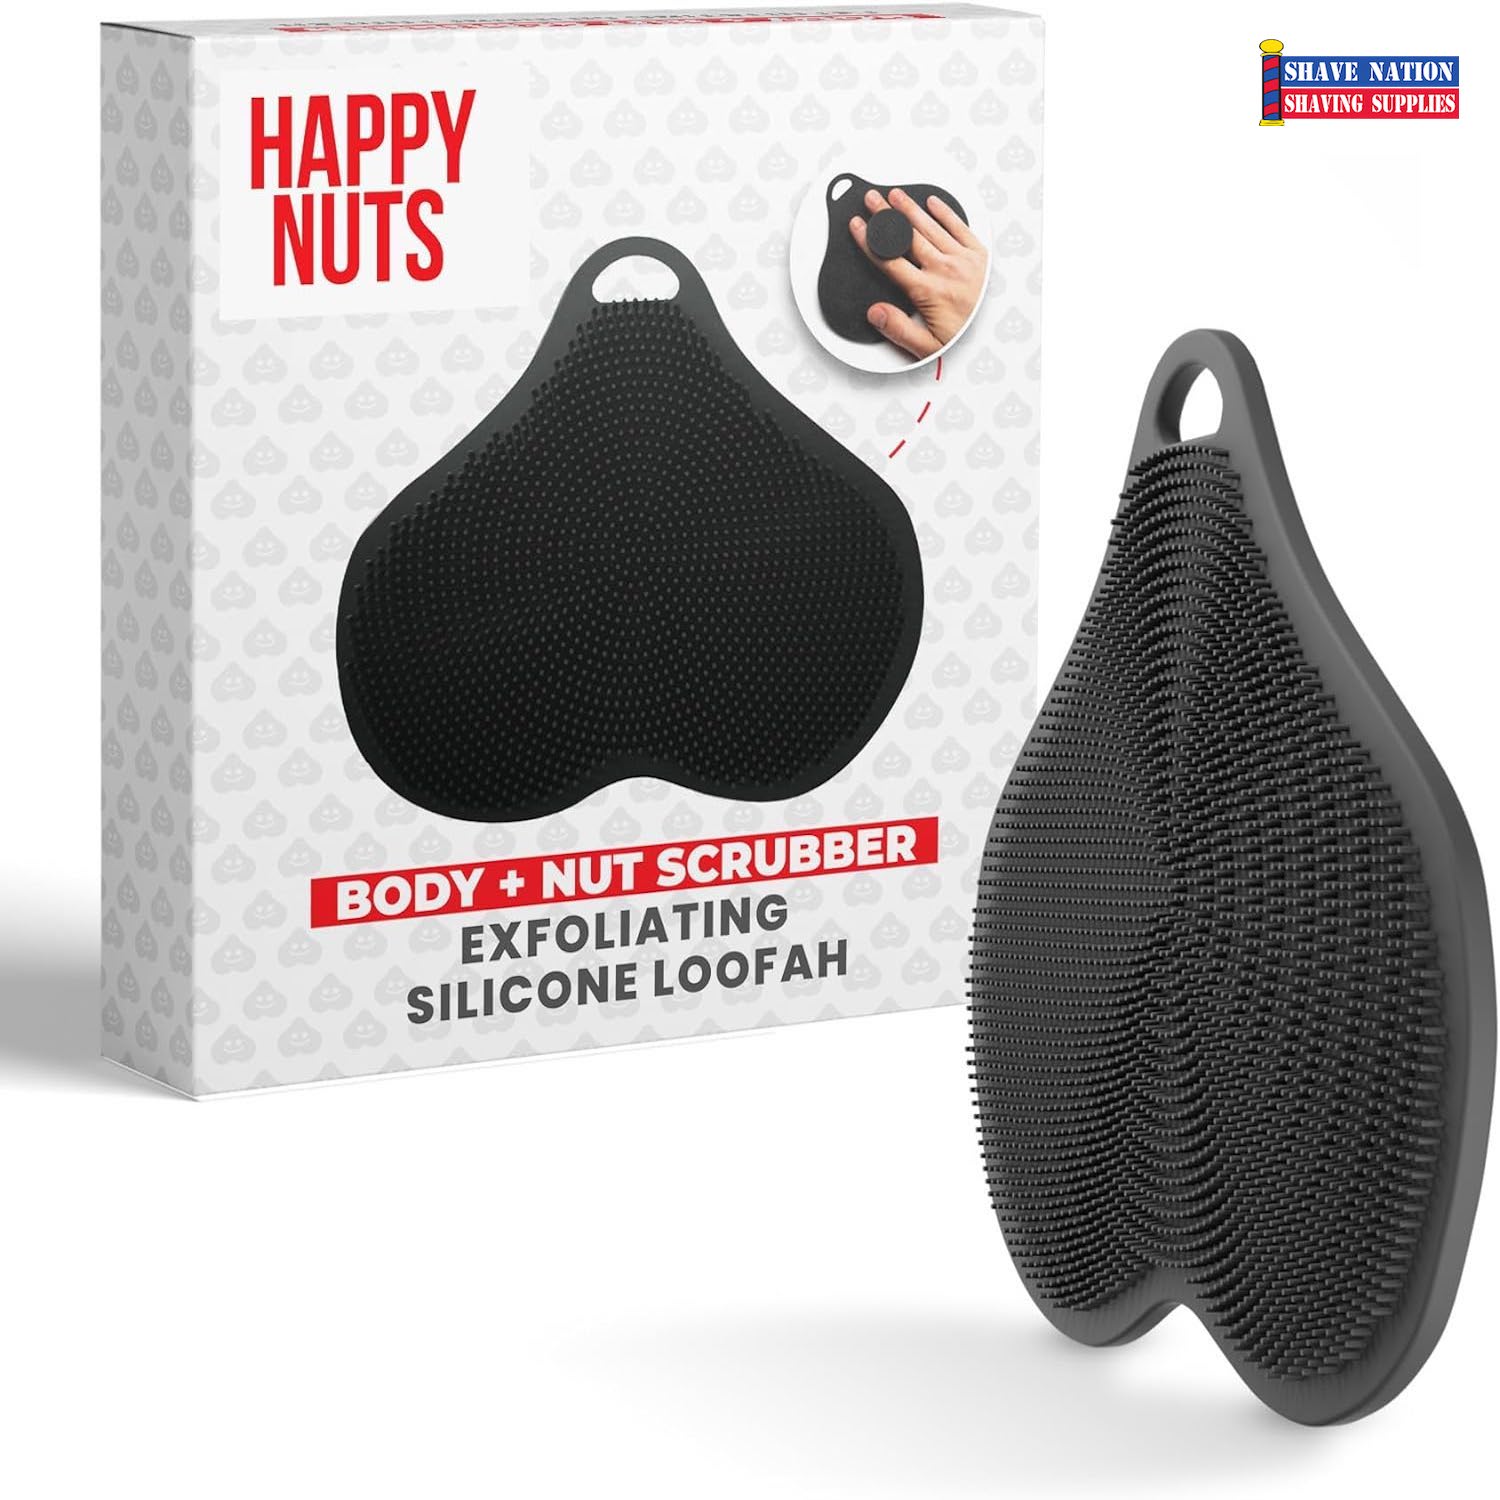 Happy Nuts Body and Nut Scrubber